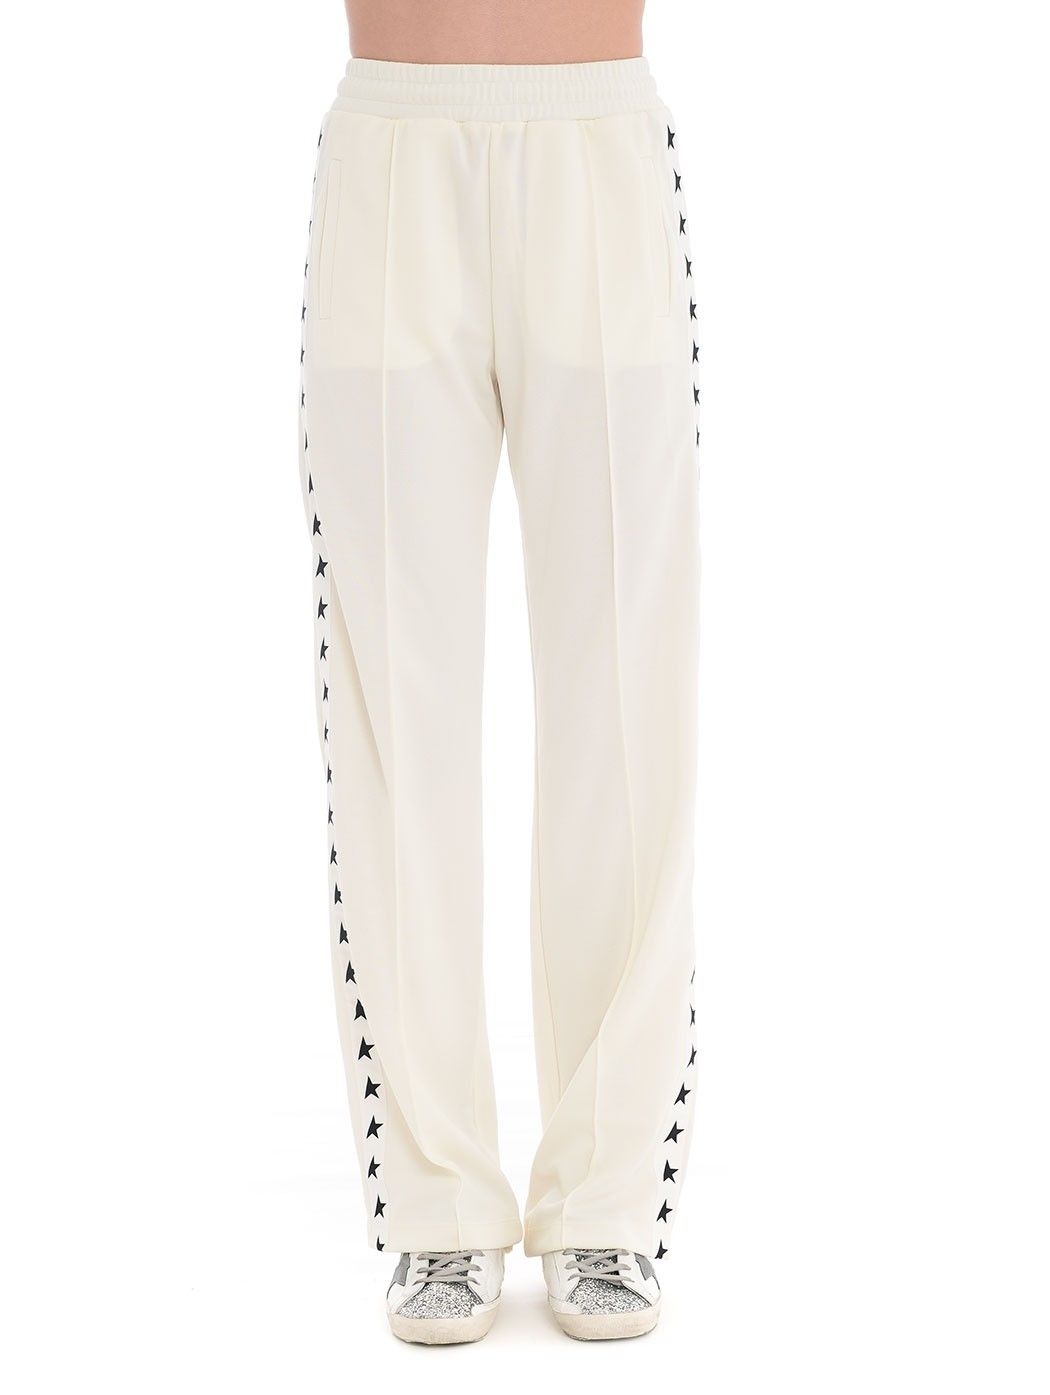  WOMAN TROUSERS,PALAZZO TROUSERS,SKINNY TROUSERS,MARNI TROUSERS,FORTE FORTE TROUSERS,8PM TROUSERS,MSGM TROUSERS,CROP PANTS  GOLDEN GOOSE GWP00877